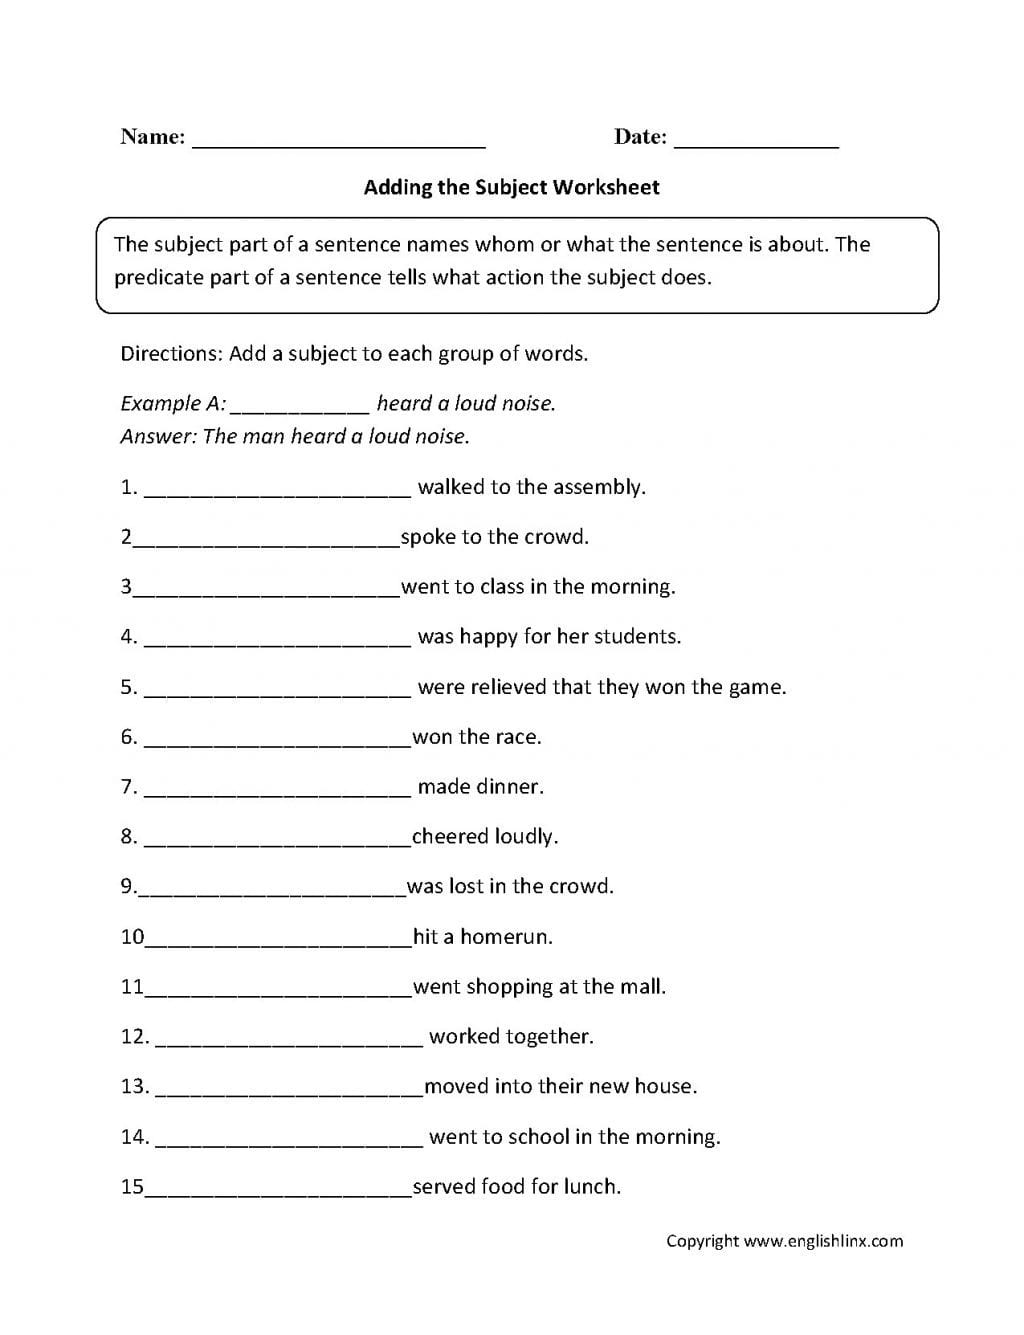 Worksheet Ideas  Worksheets For 9Th Grade Printable And As Well As 9Th Grade English Worksheets